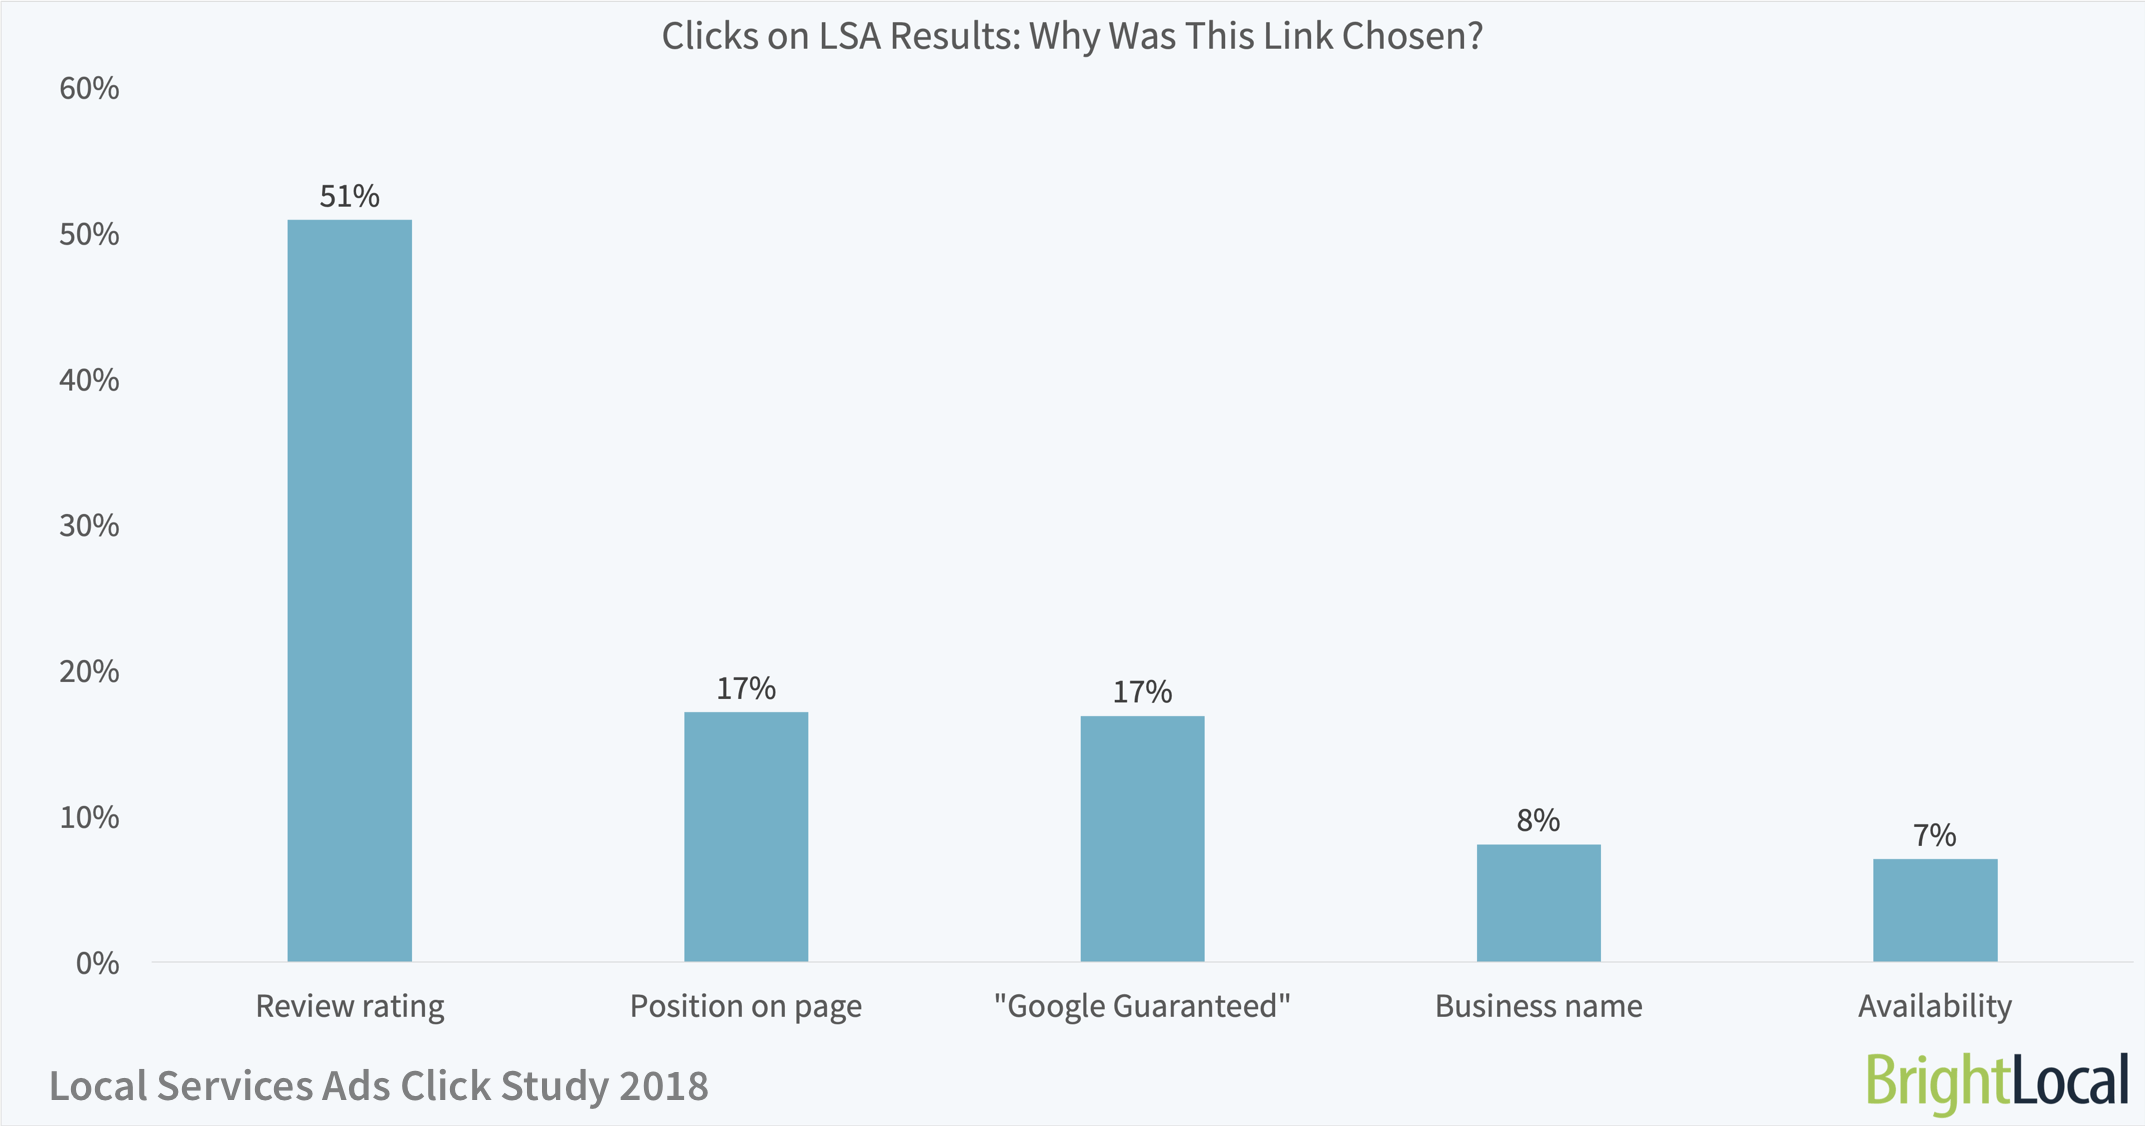 Local Services Ads Click Study | Reasons for LSA SERP Clicks 